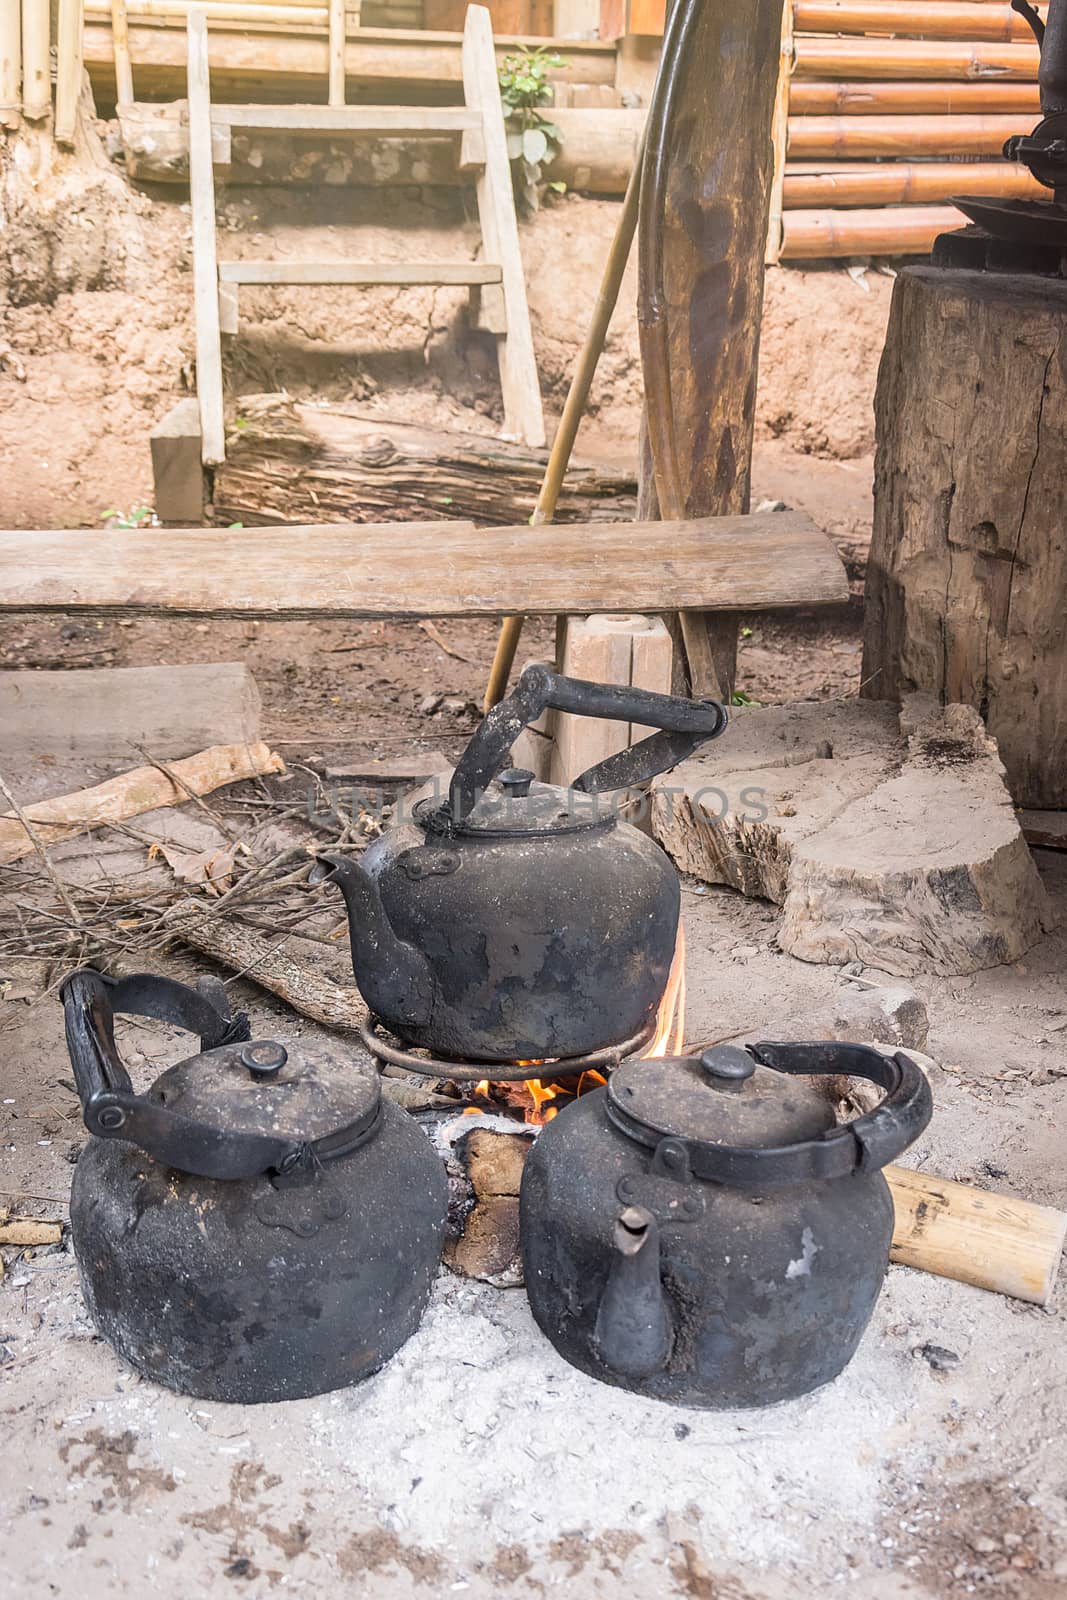 kettle boiling on stove in the kitchen tribal rural north of Thailand.